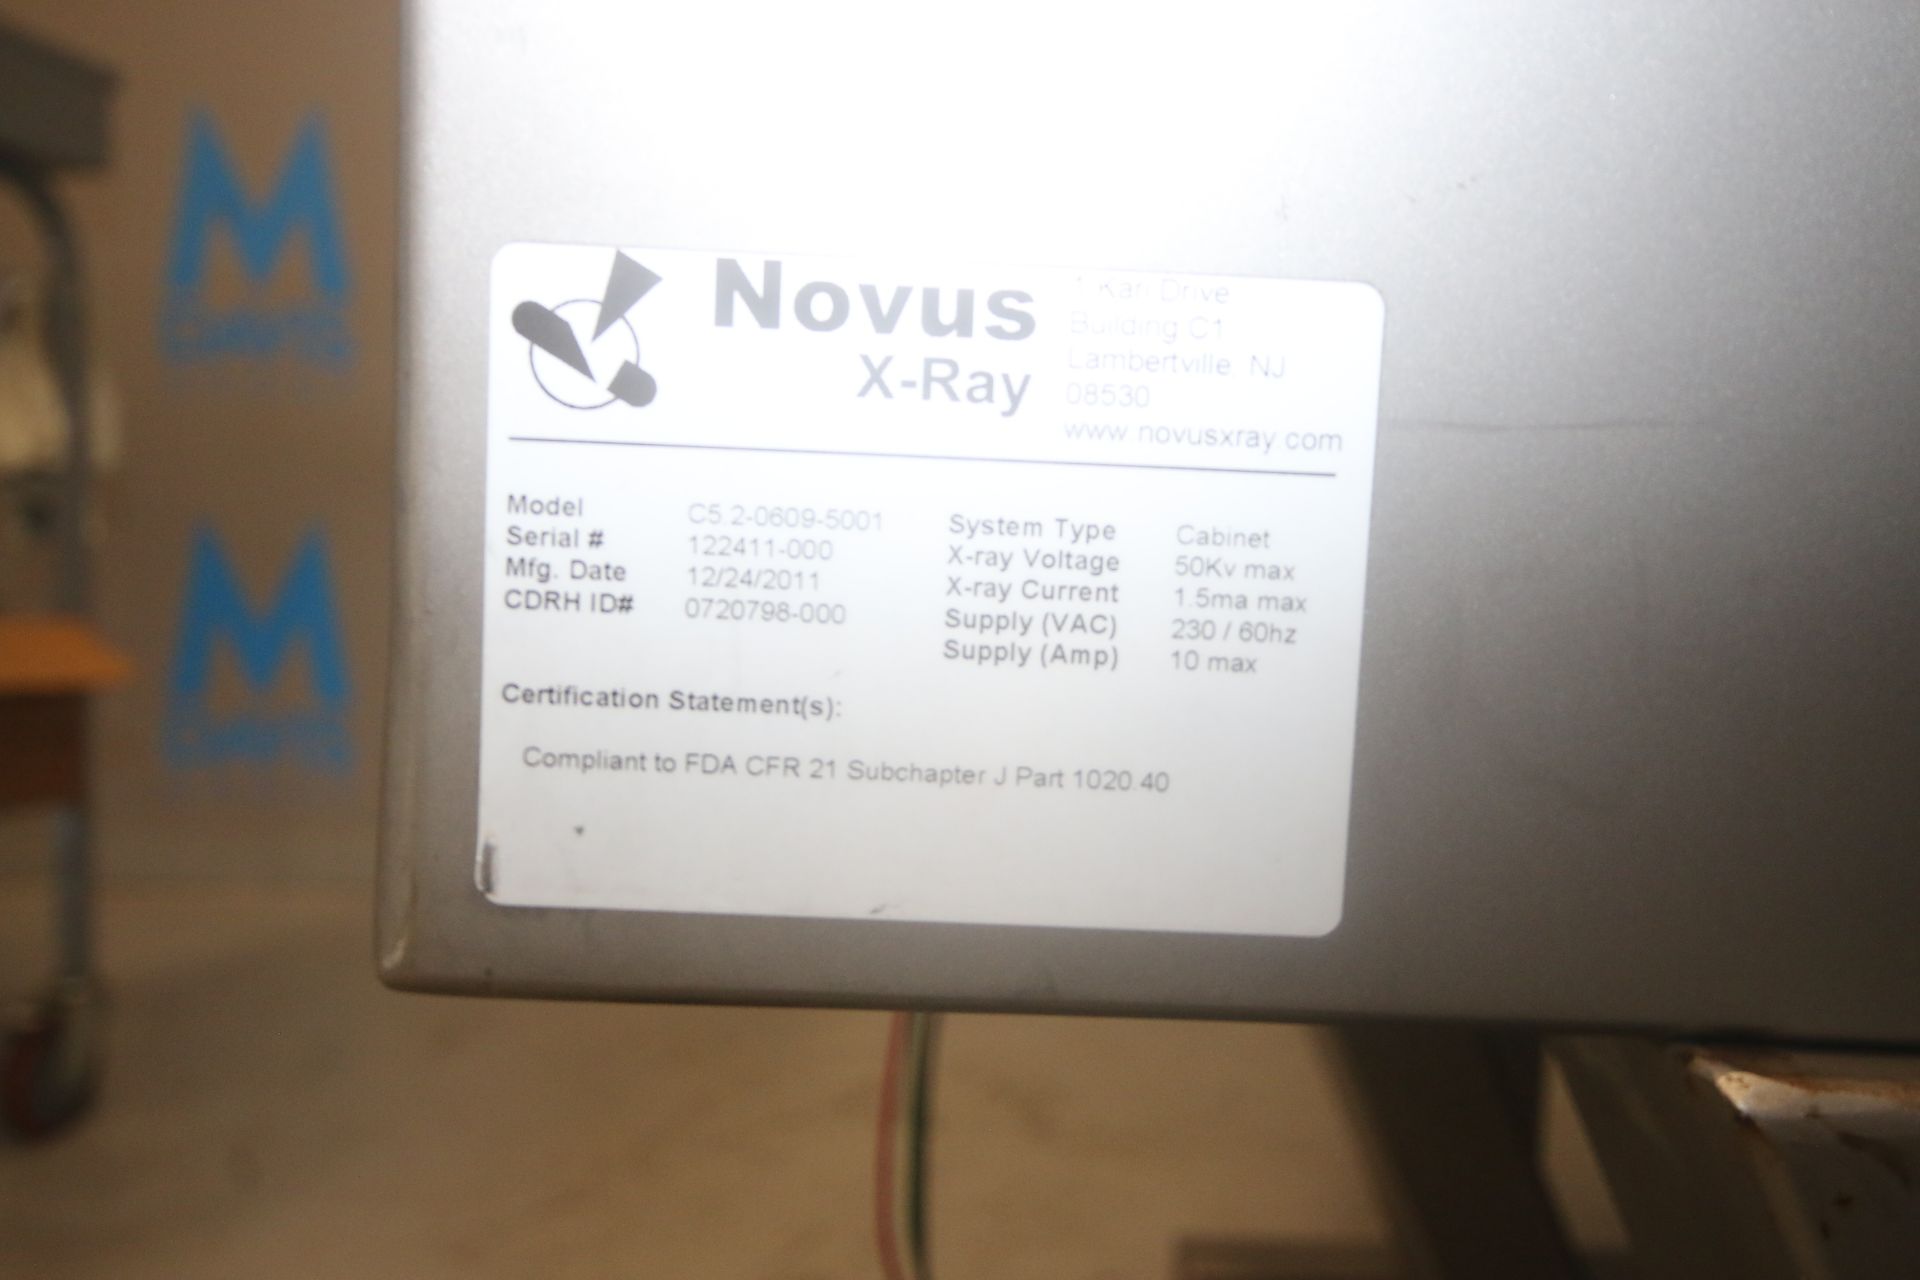 2011 Norvus X-Ray, M/N C5 2-0609-5001, S/N 122411-000, 230 Volts, with Aprox. 6" W Belt, with Aprox. - Image 7 of 7